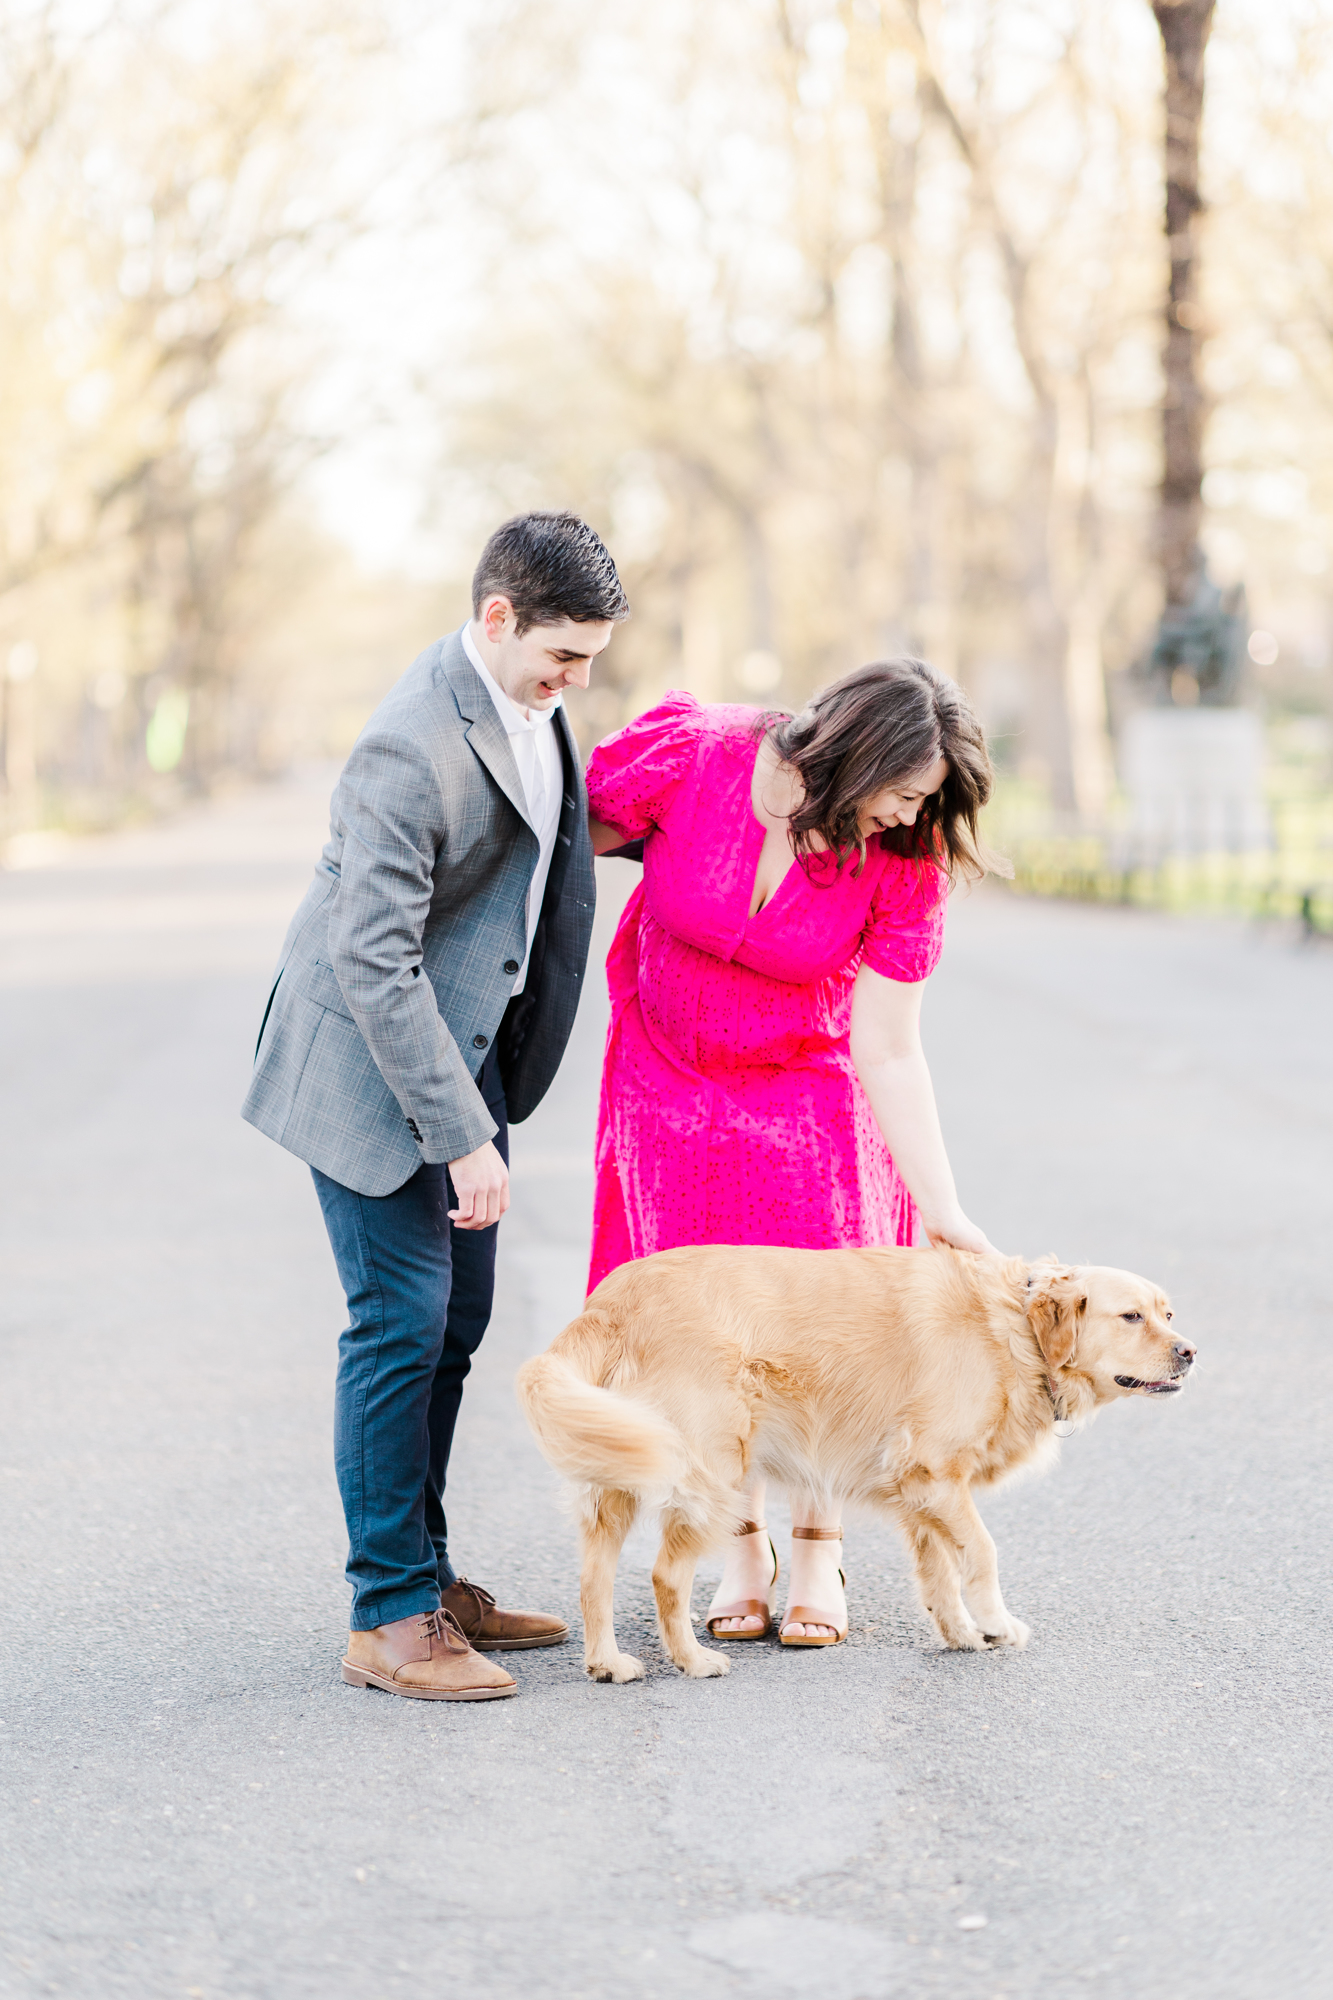 Whimsical Spring Engagement Photography in NYC